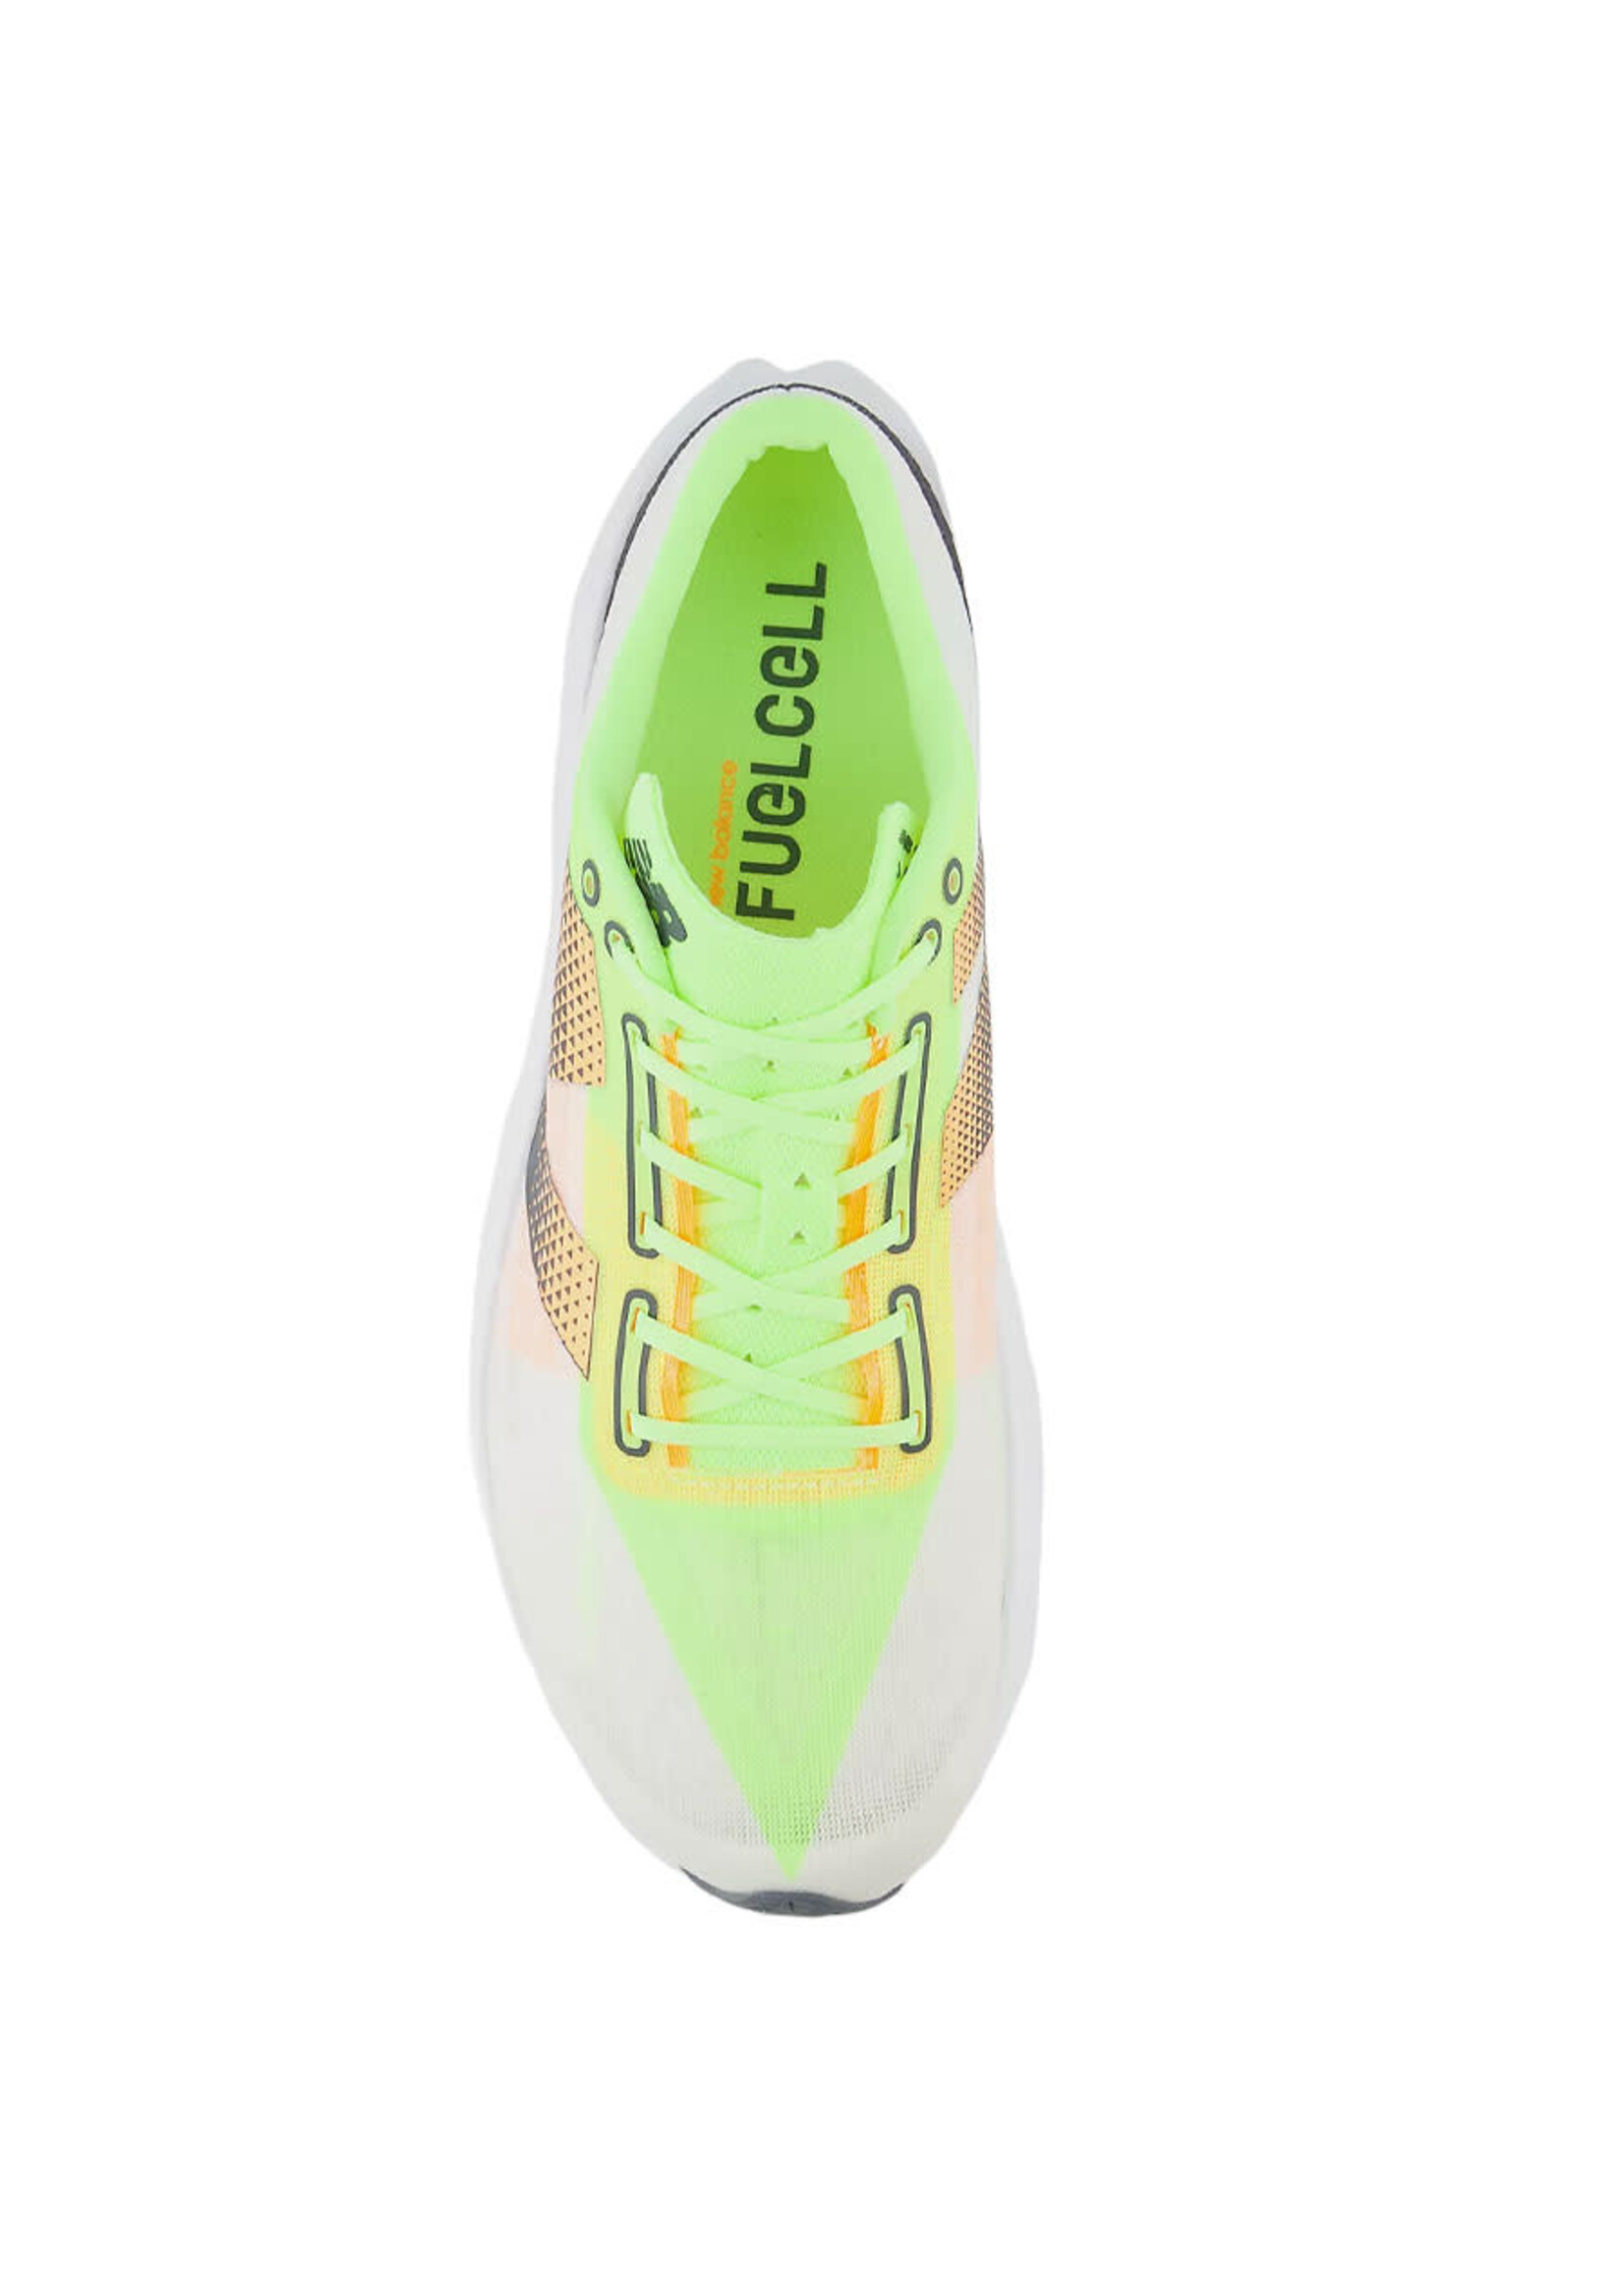 NEW BALANCE Souliers FUELCELL PVLSE V1 B / Vert Lime (Femme)